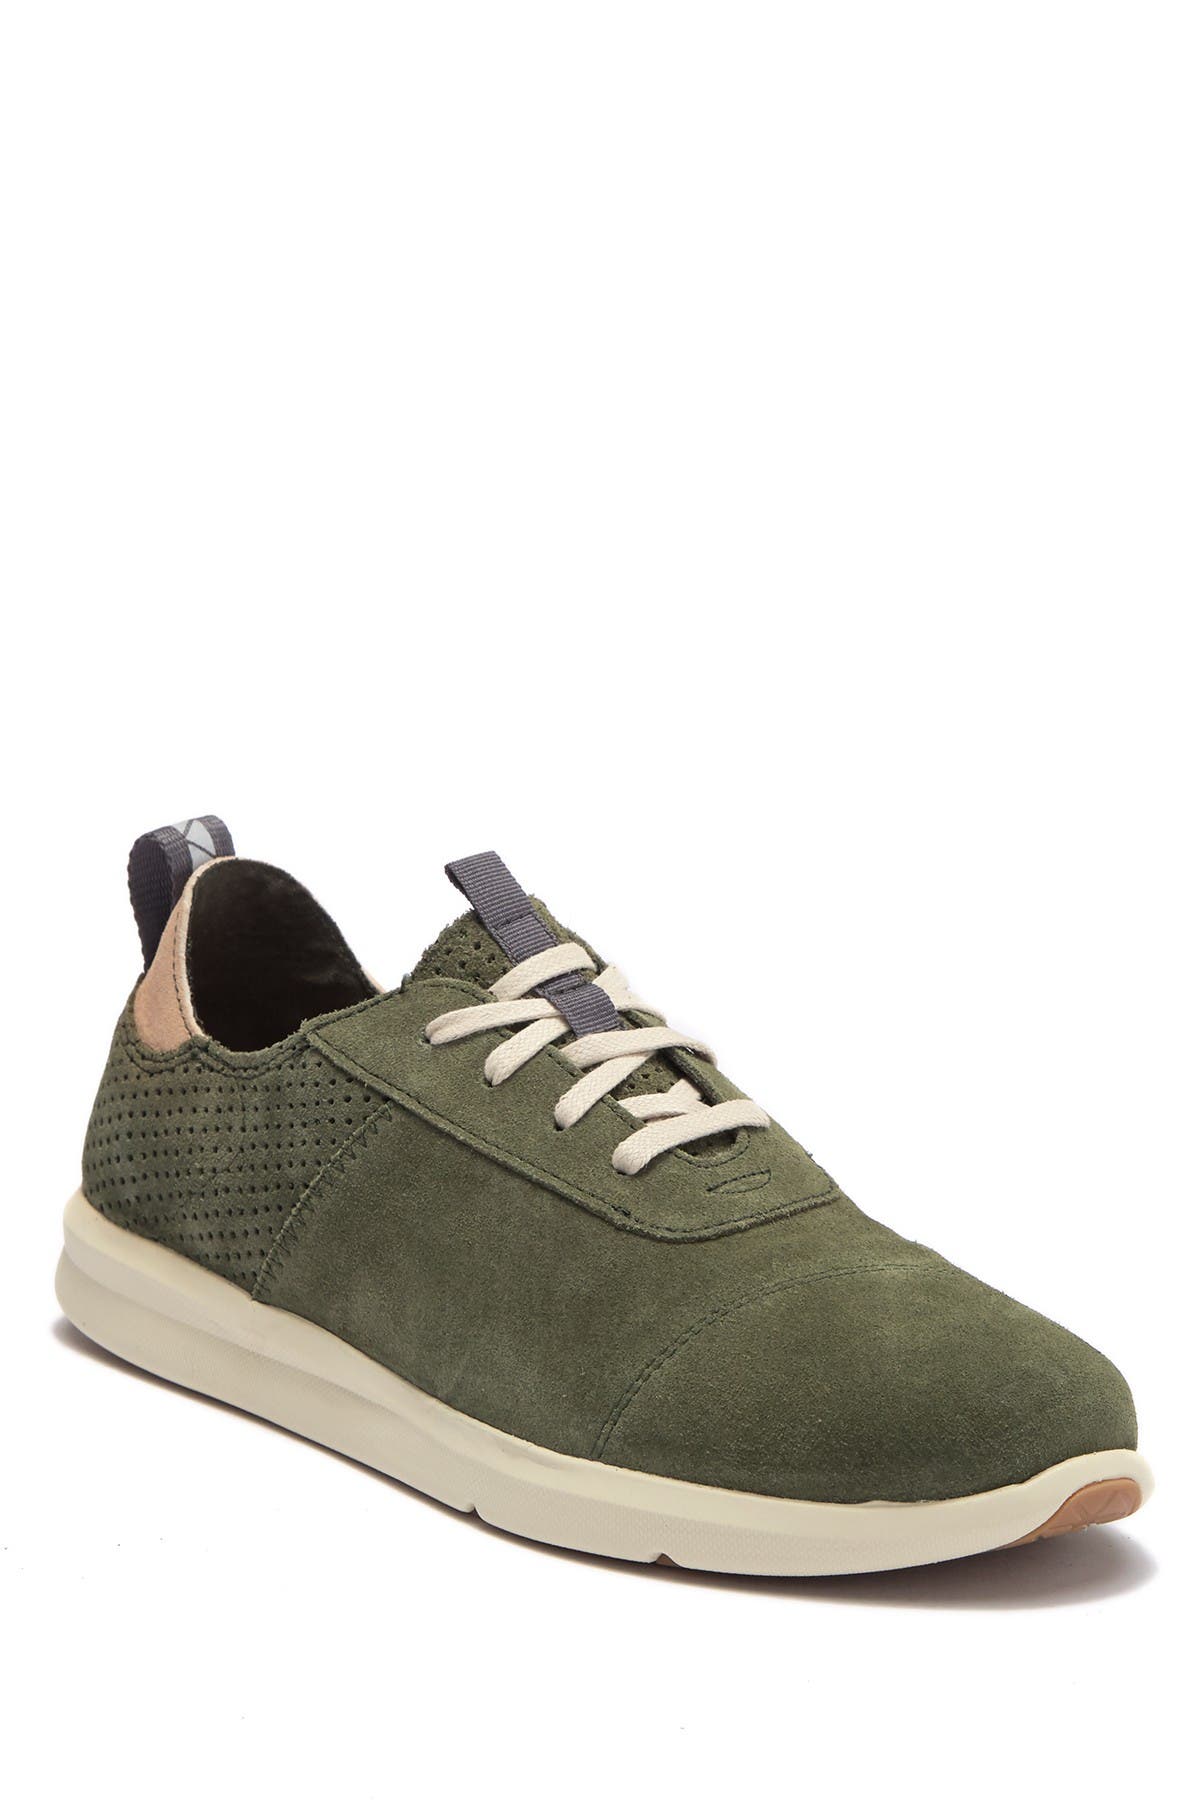 TOMS | Cabrillo Perforated Suede 